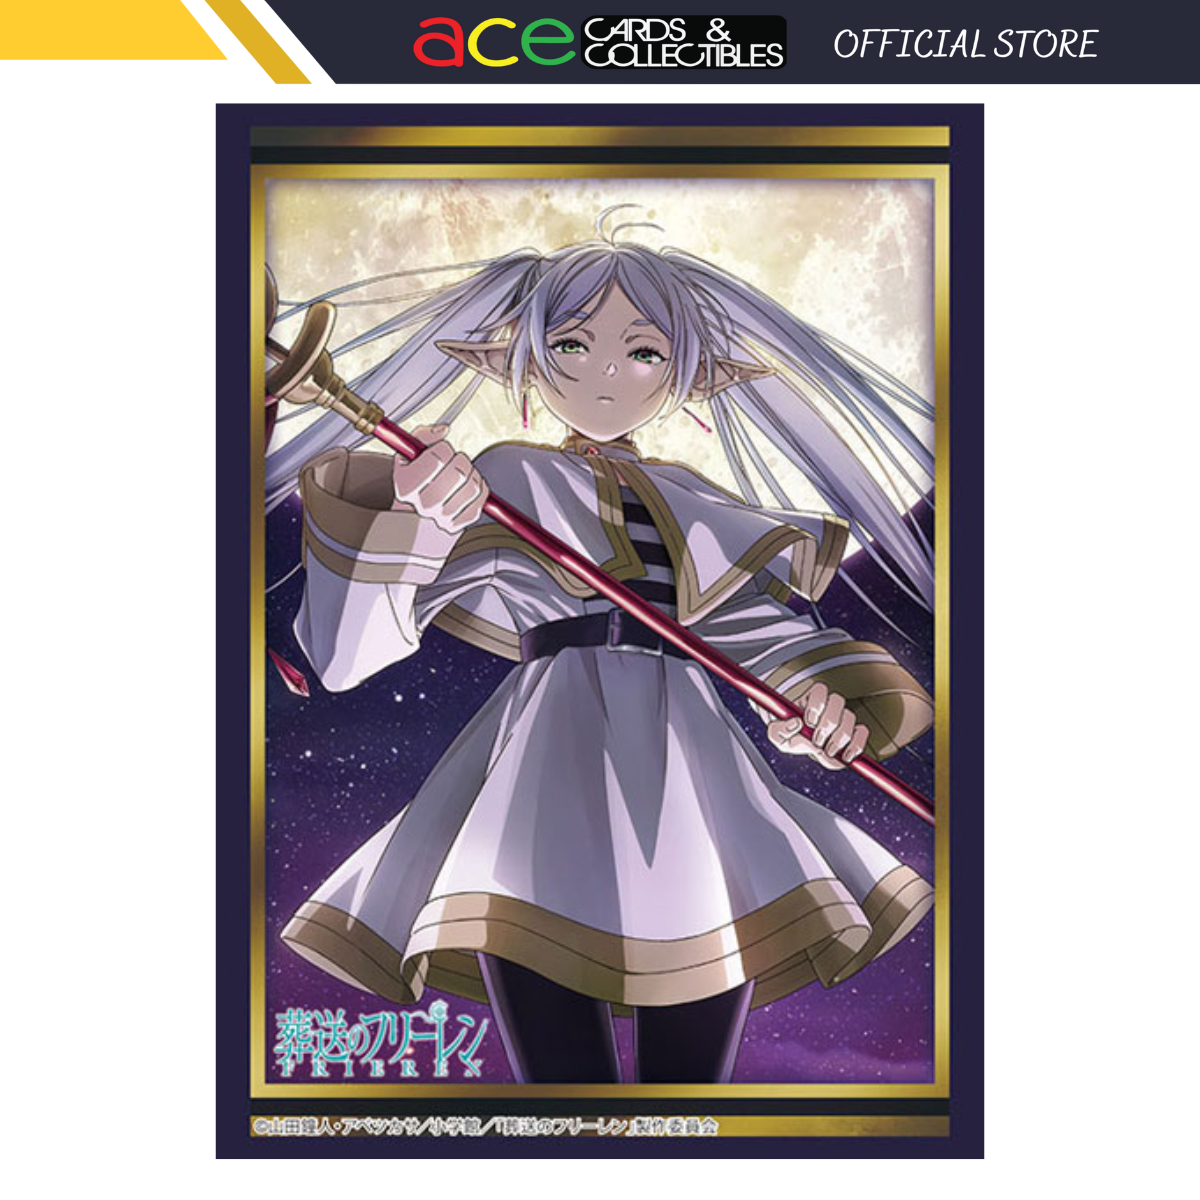 Bushiroad Sleeves Collection -Frieren: Beyond Journey's End- (Vol.4149)-Bushiroad-Ace Cards & Collectibles